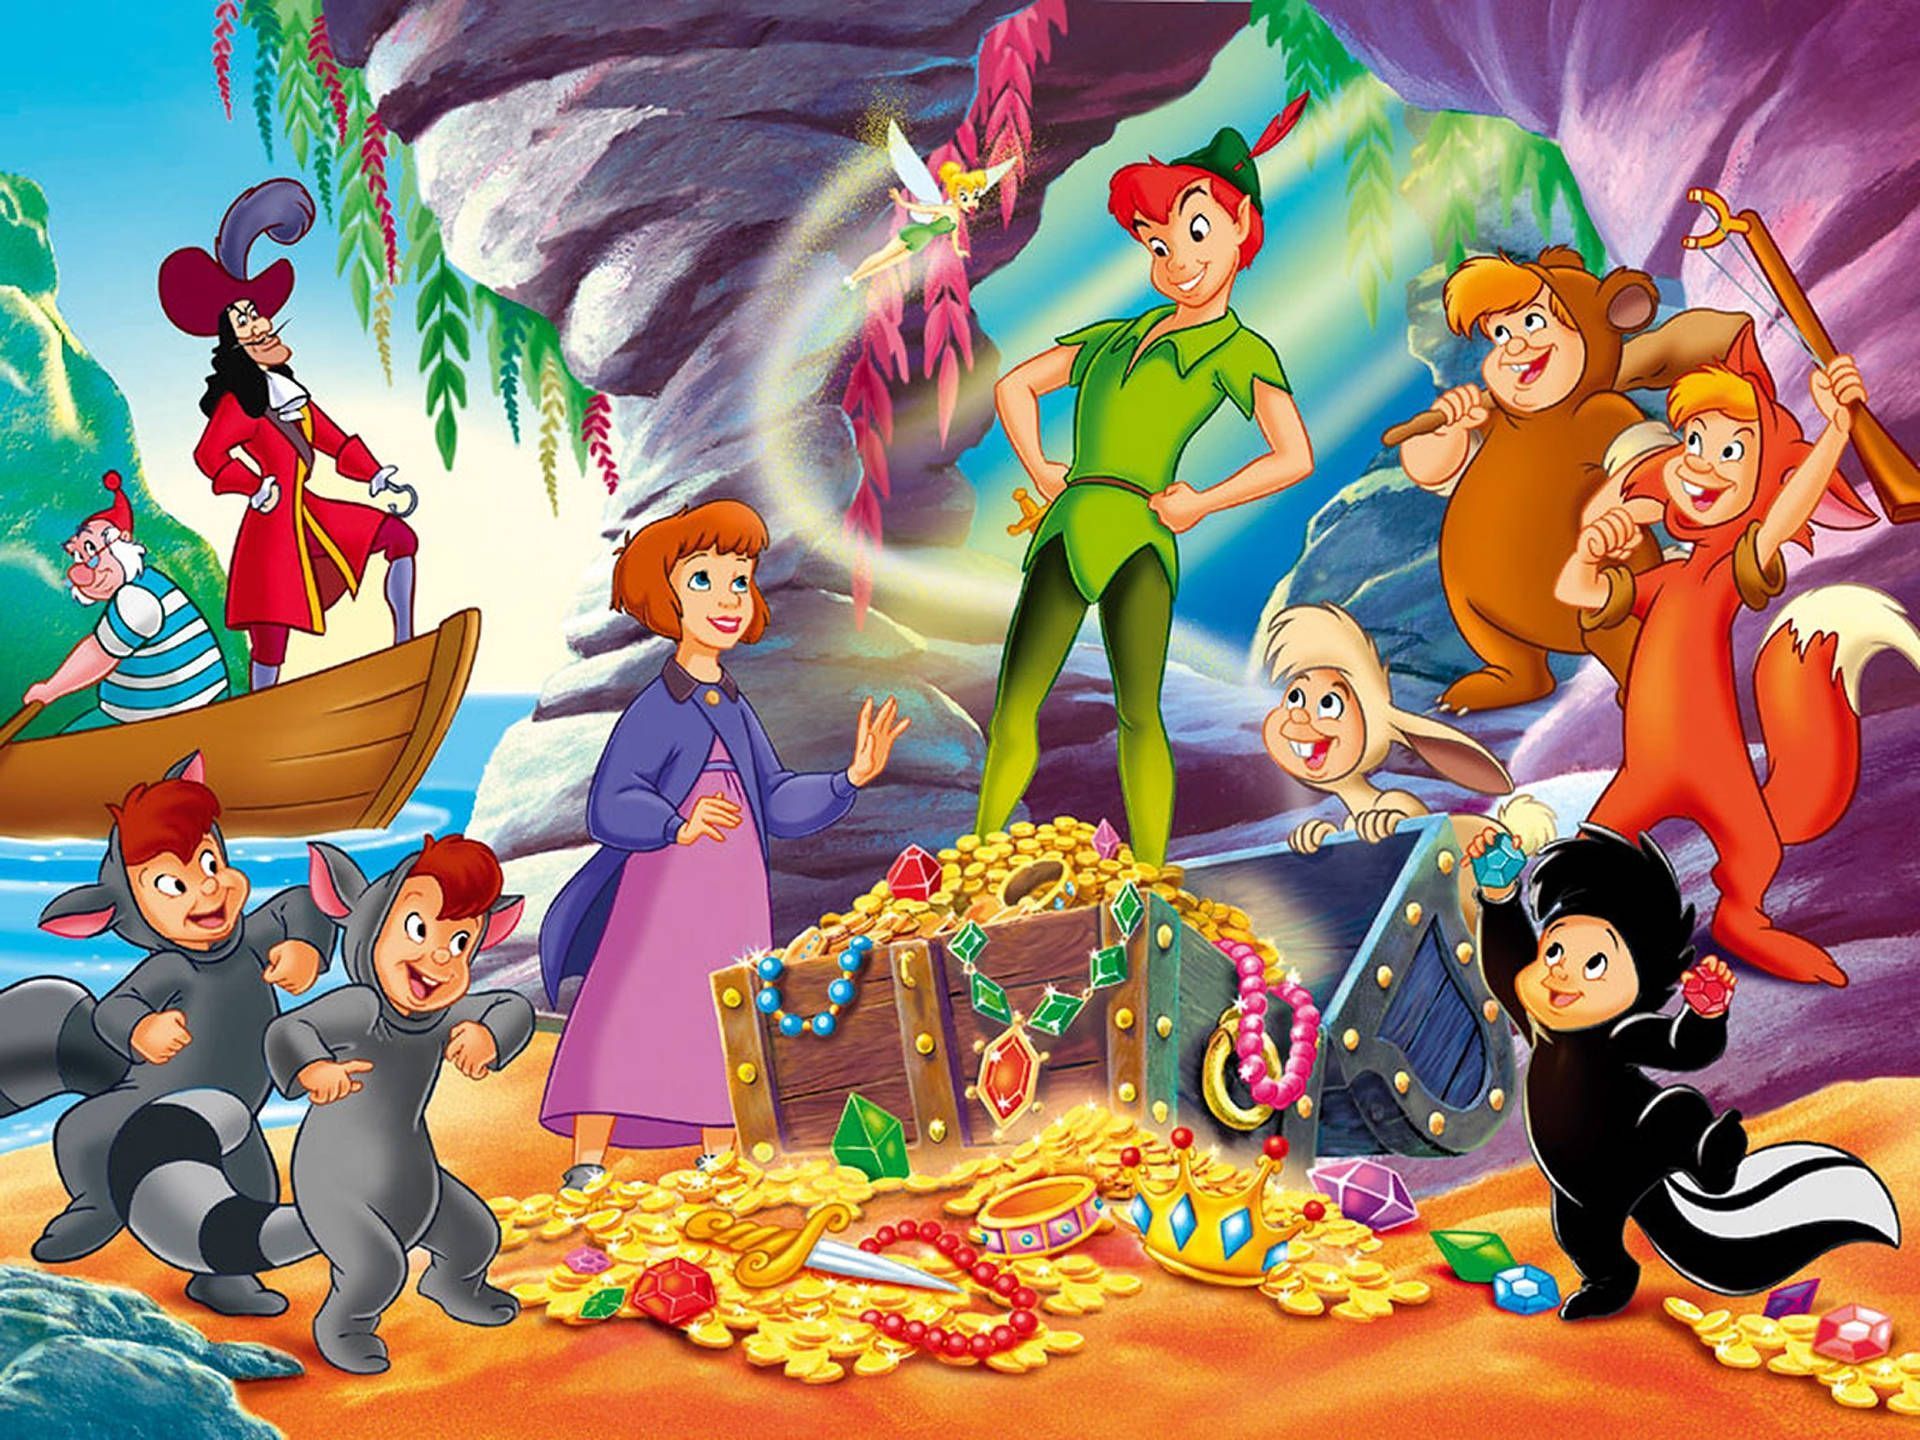 Peter Pan and the Lost Boys, along with Tinker Bell, Wendy, and Captain Hook, stand in front of a treasure chest filled with gold coins. - Peter Pan